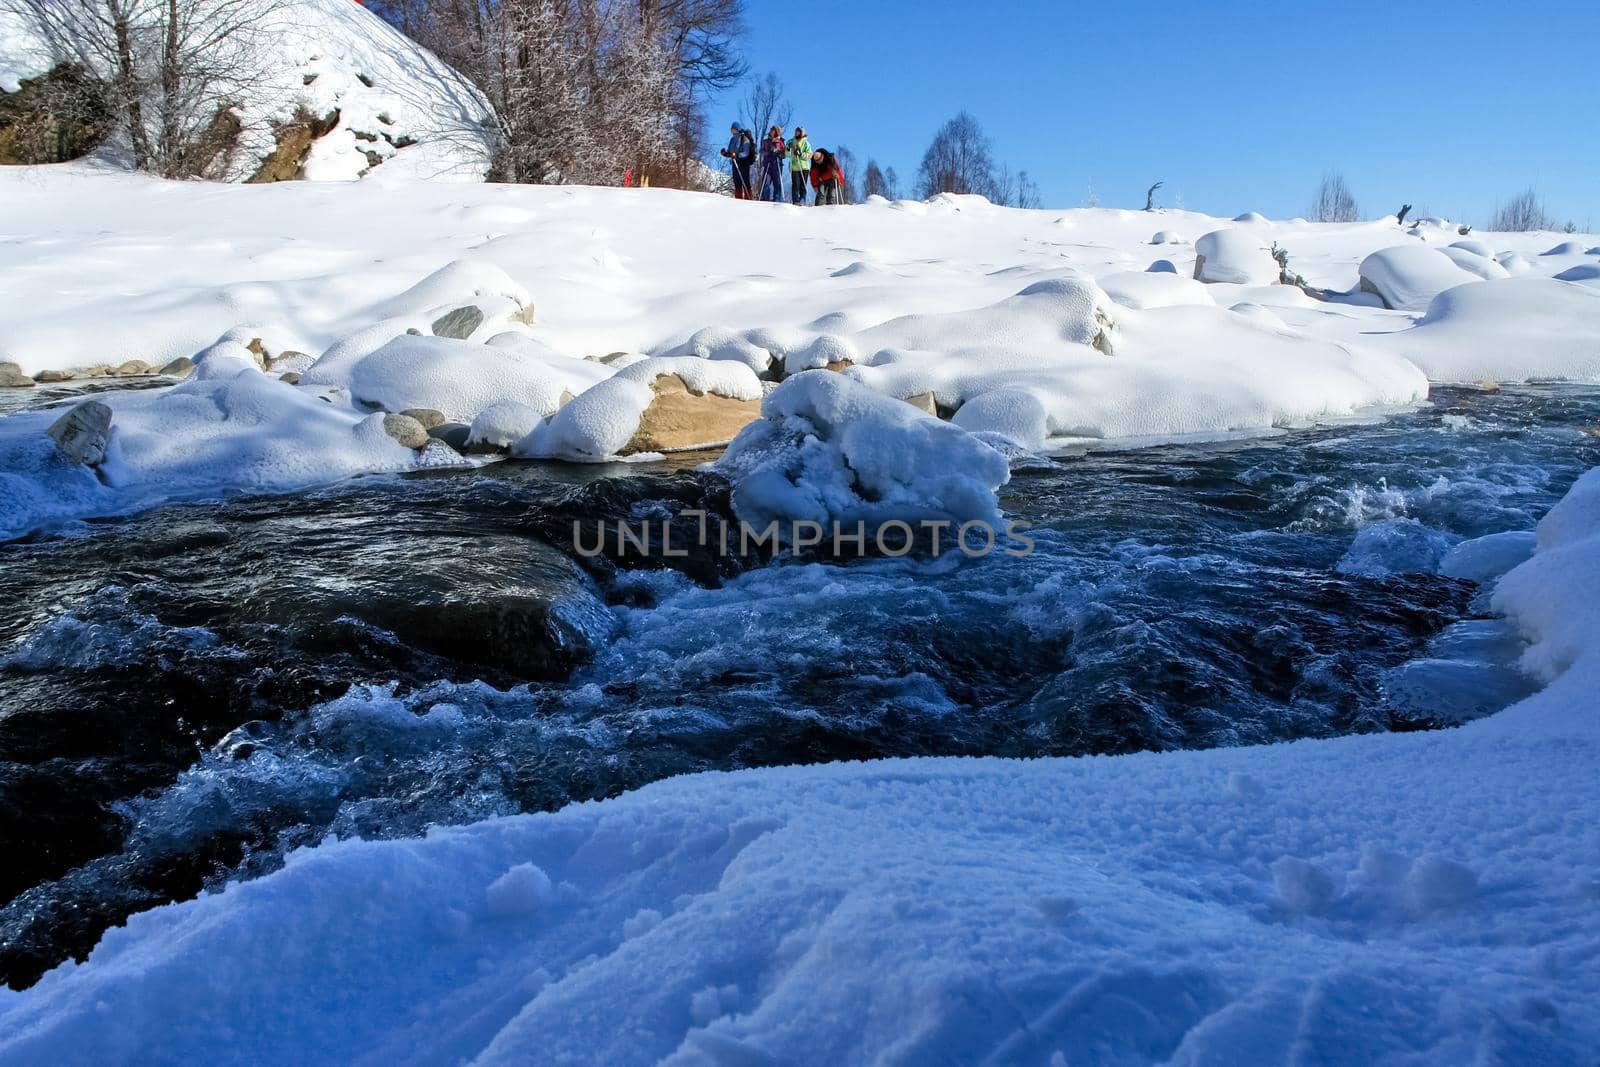 A section of the river free of snow and ice. The nature of baikal.